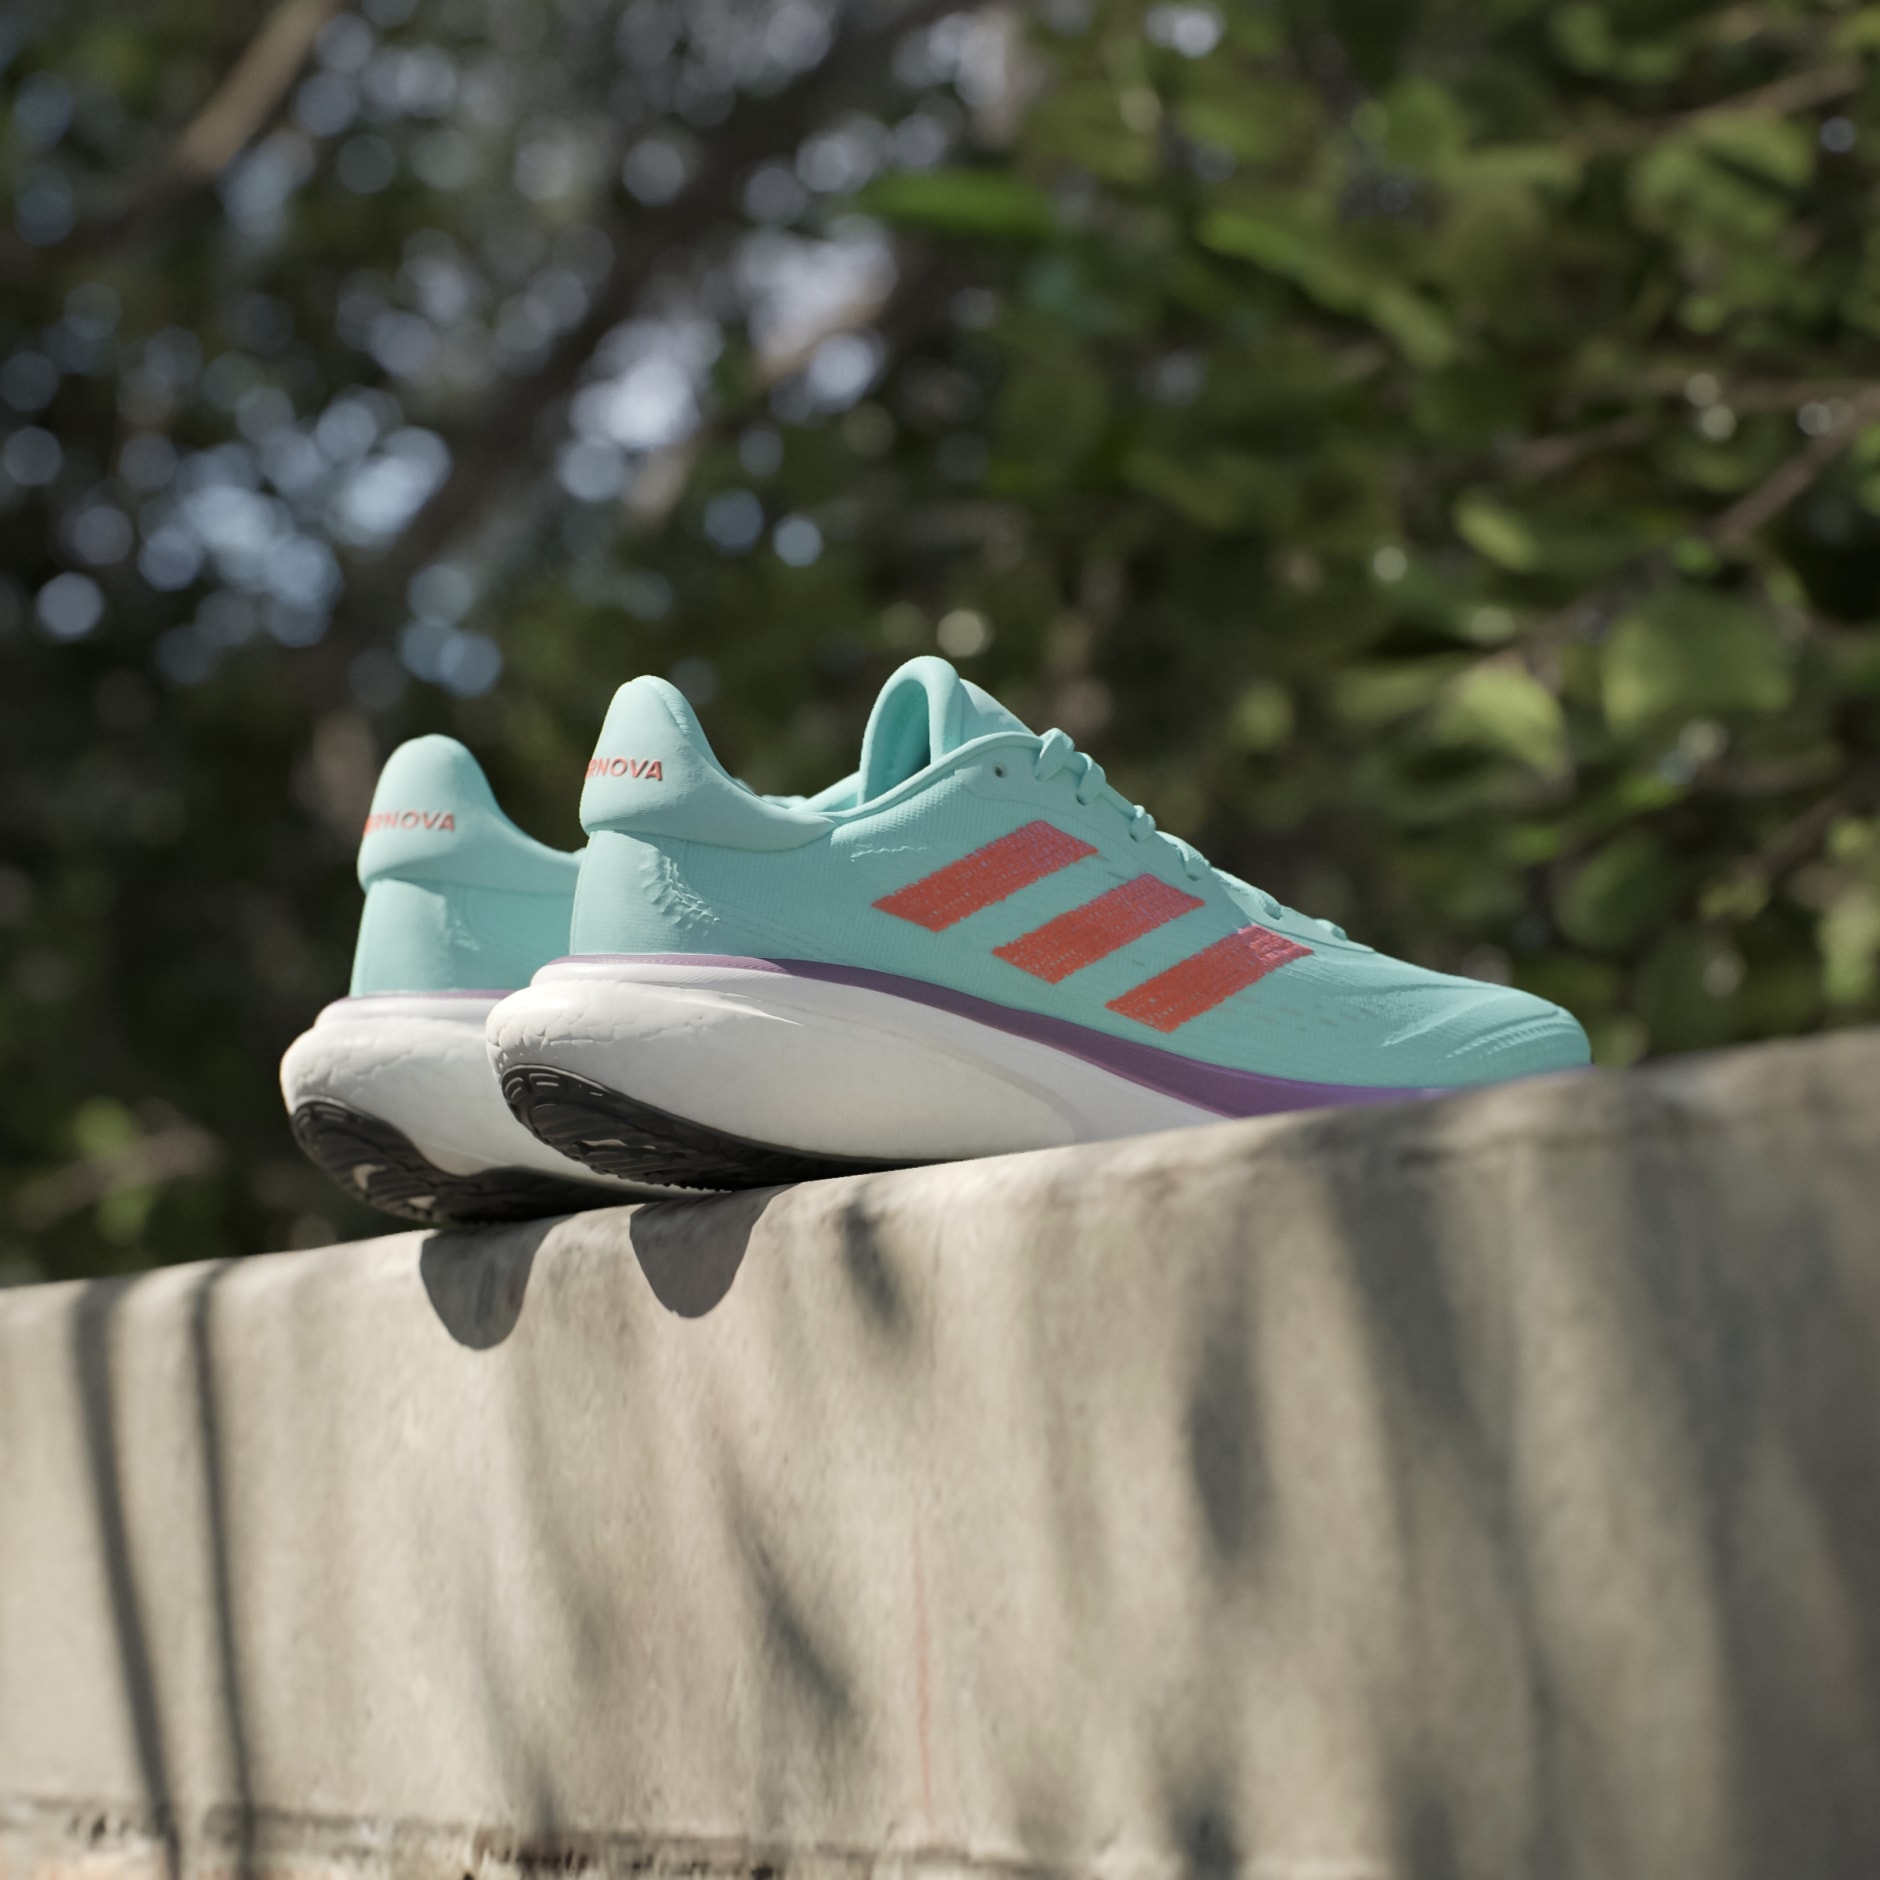 Shoes - Supernova 3 Running Shoes - Turquoise | adidas South Africa